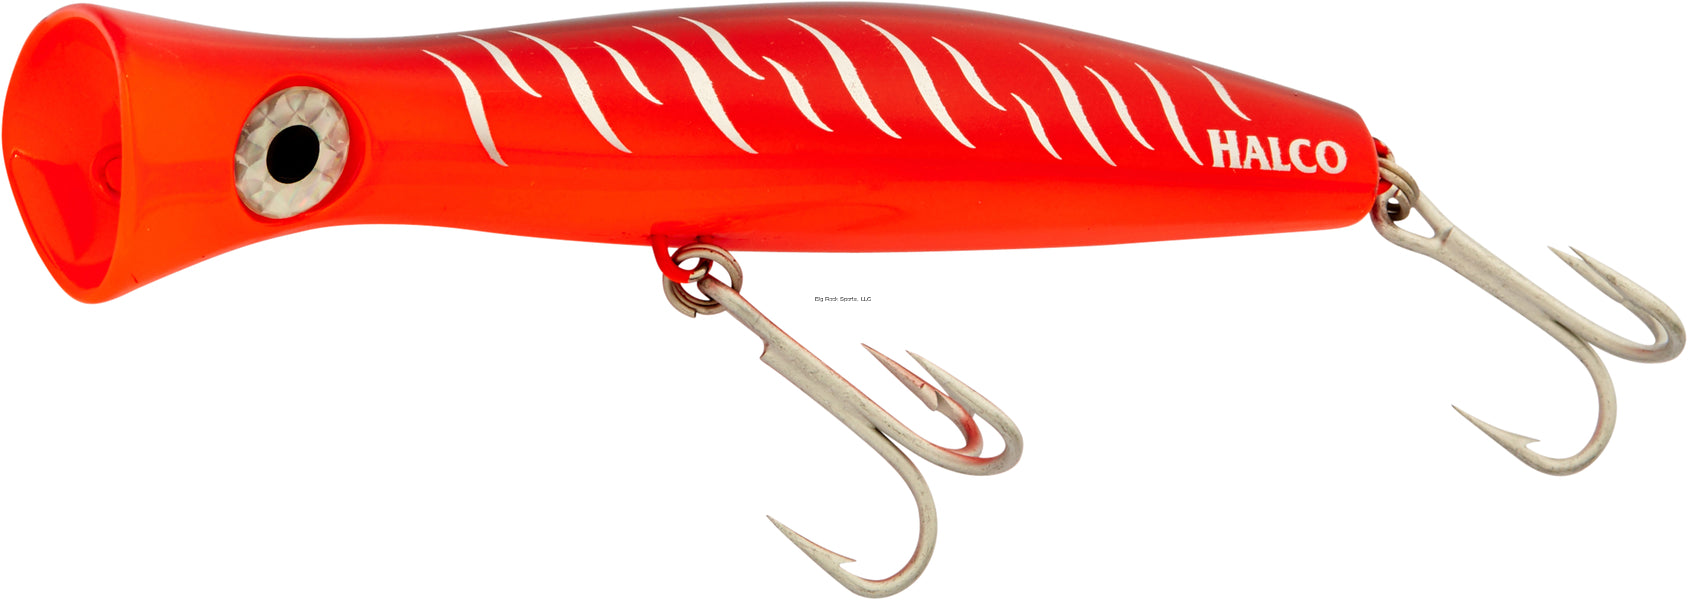 Halco Roosta Popper Casting Lures (2 3/8-7 7/8", 1/4-4 1/4oz, Multiple Colors)